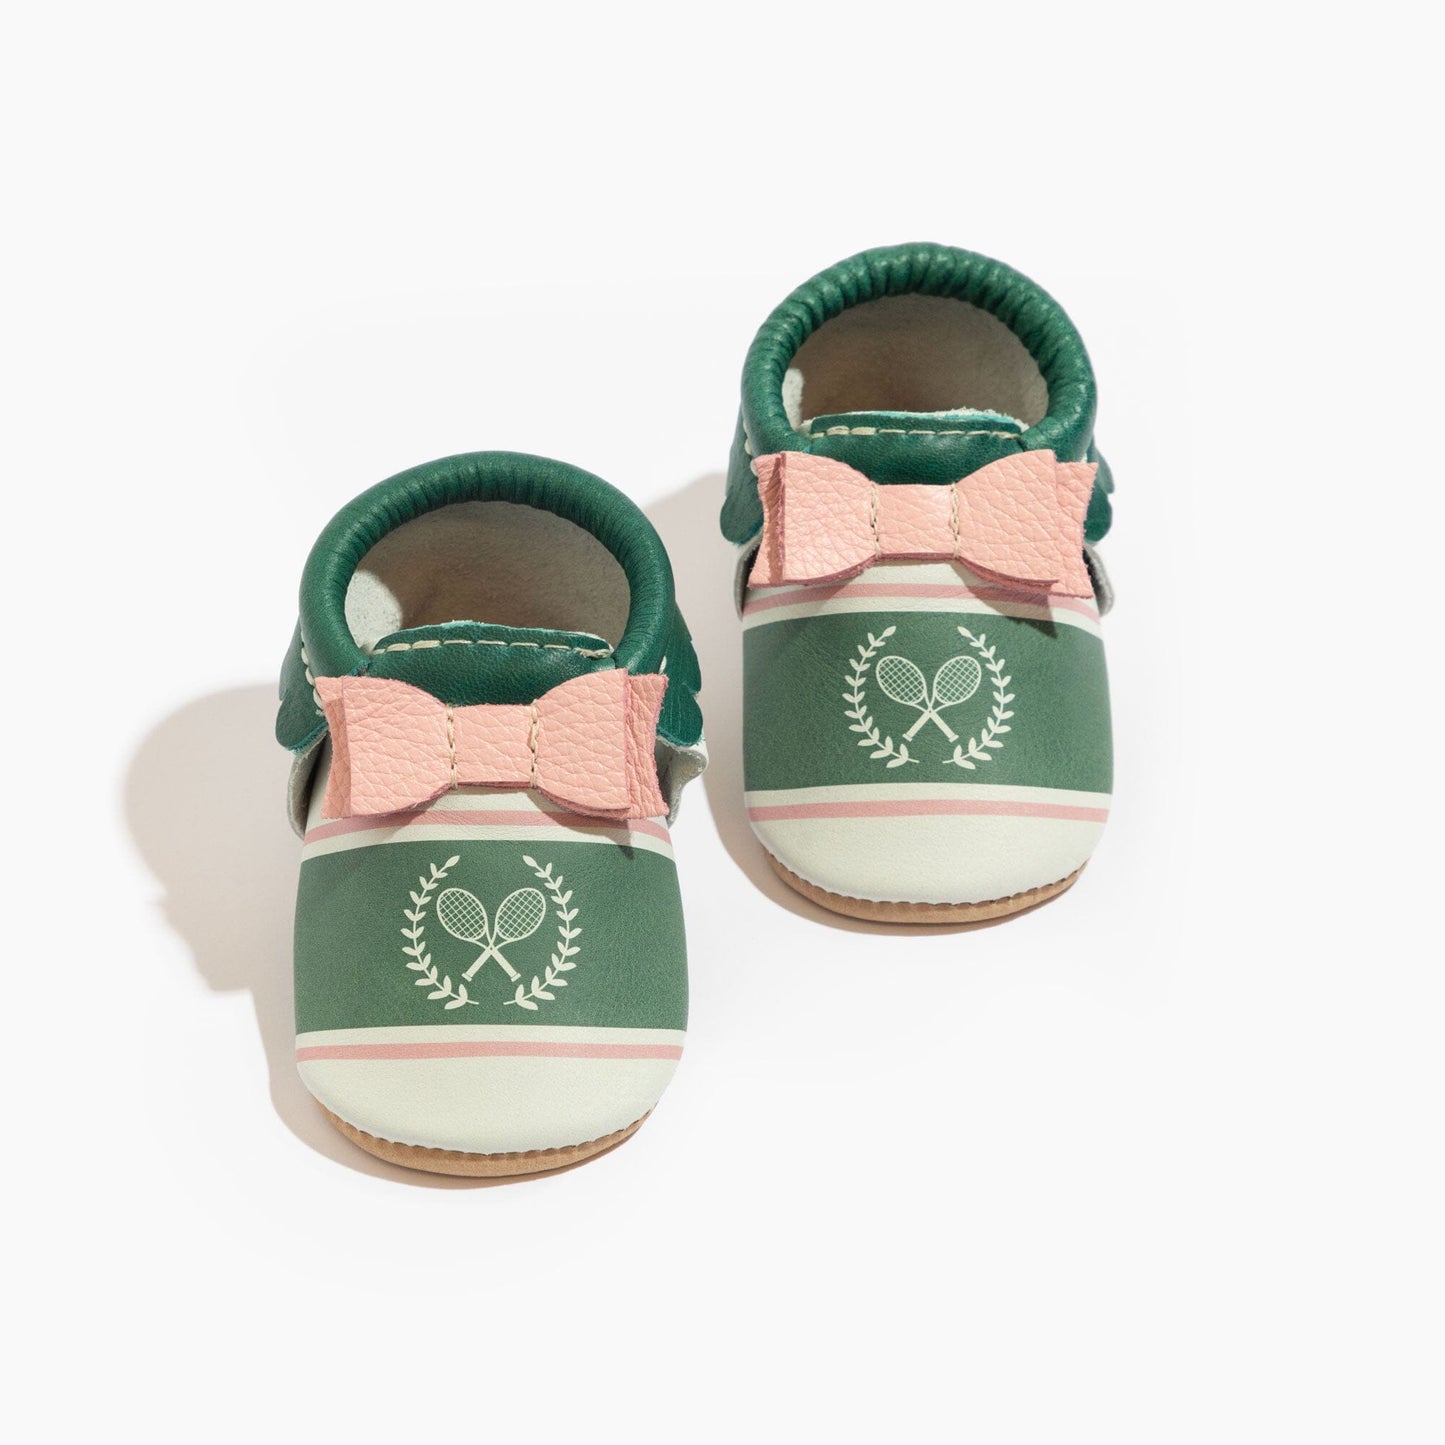 Country Club Bow Baby Shoe Bow Mocc Soft Sole 